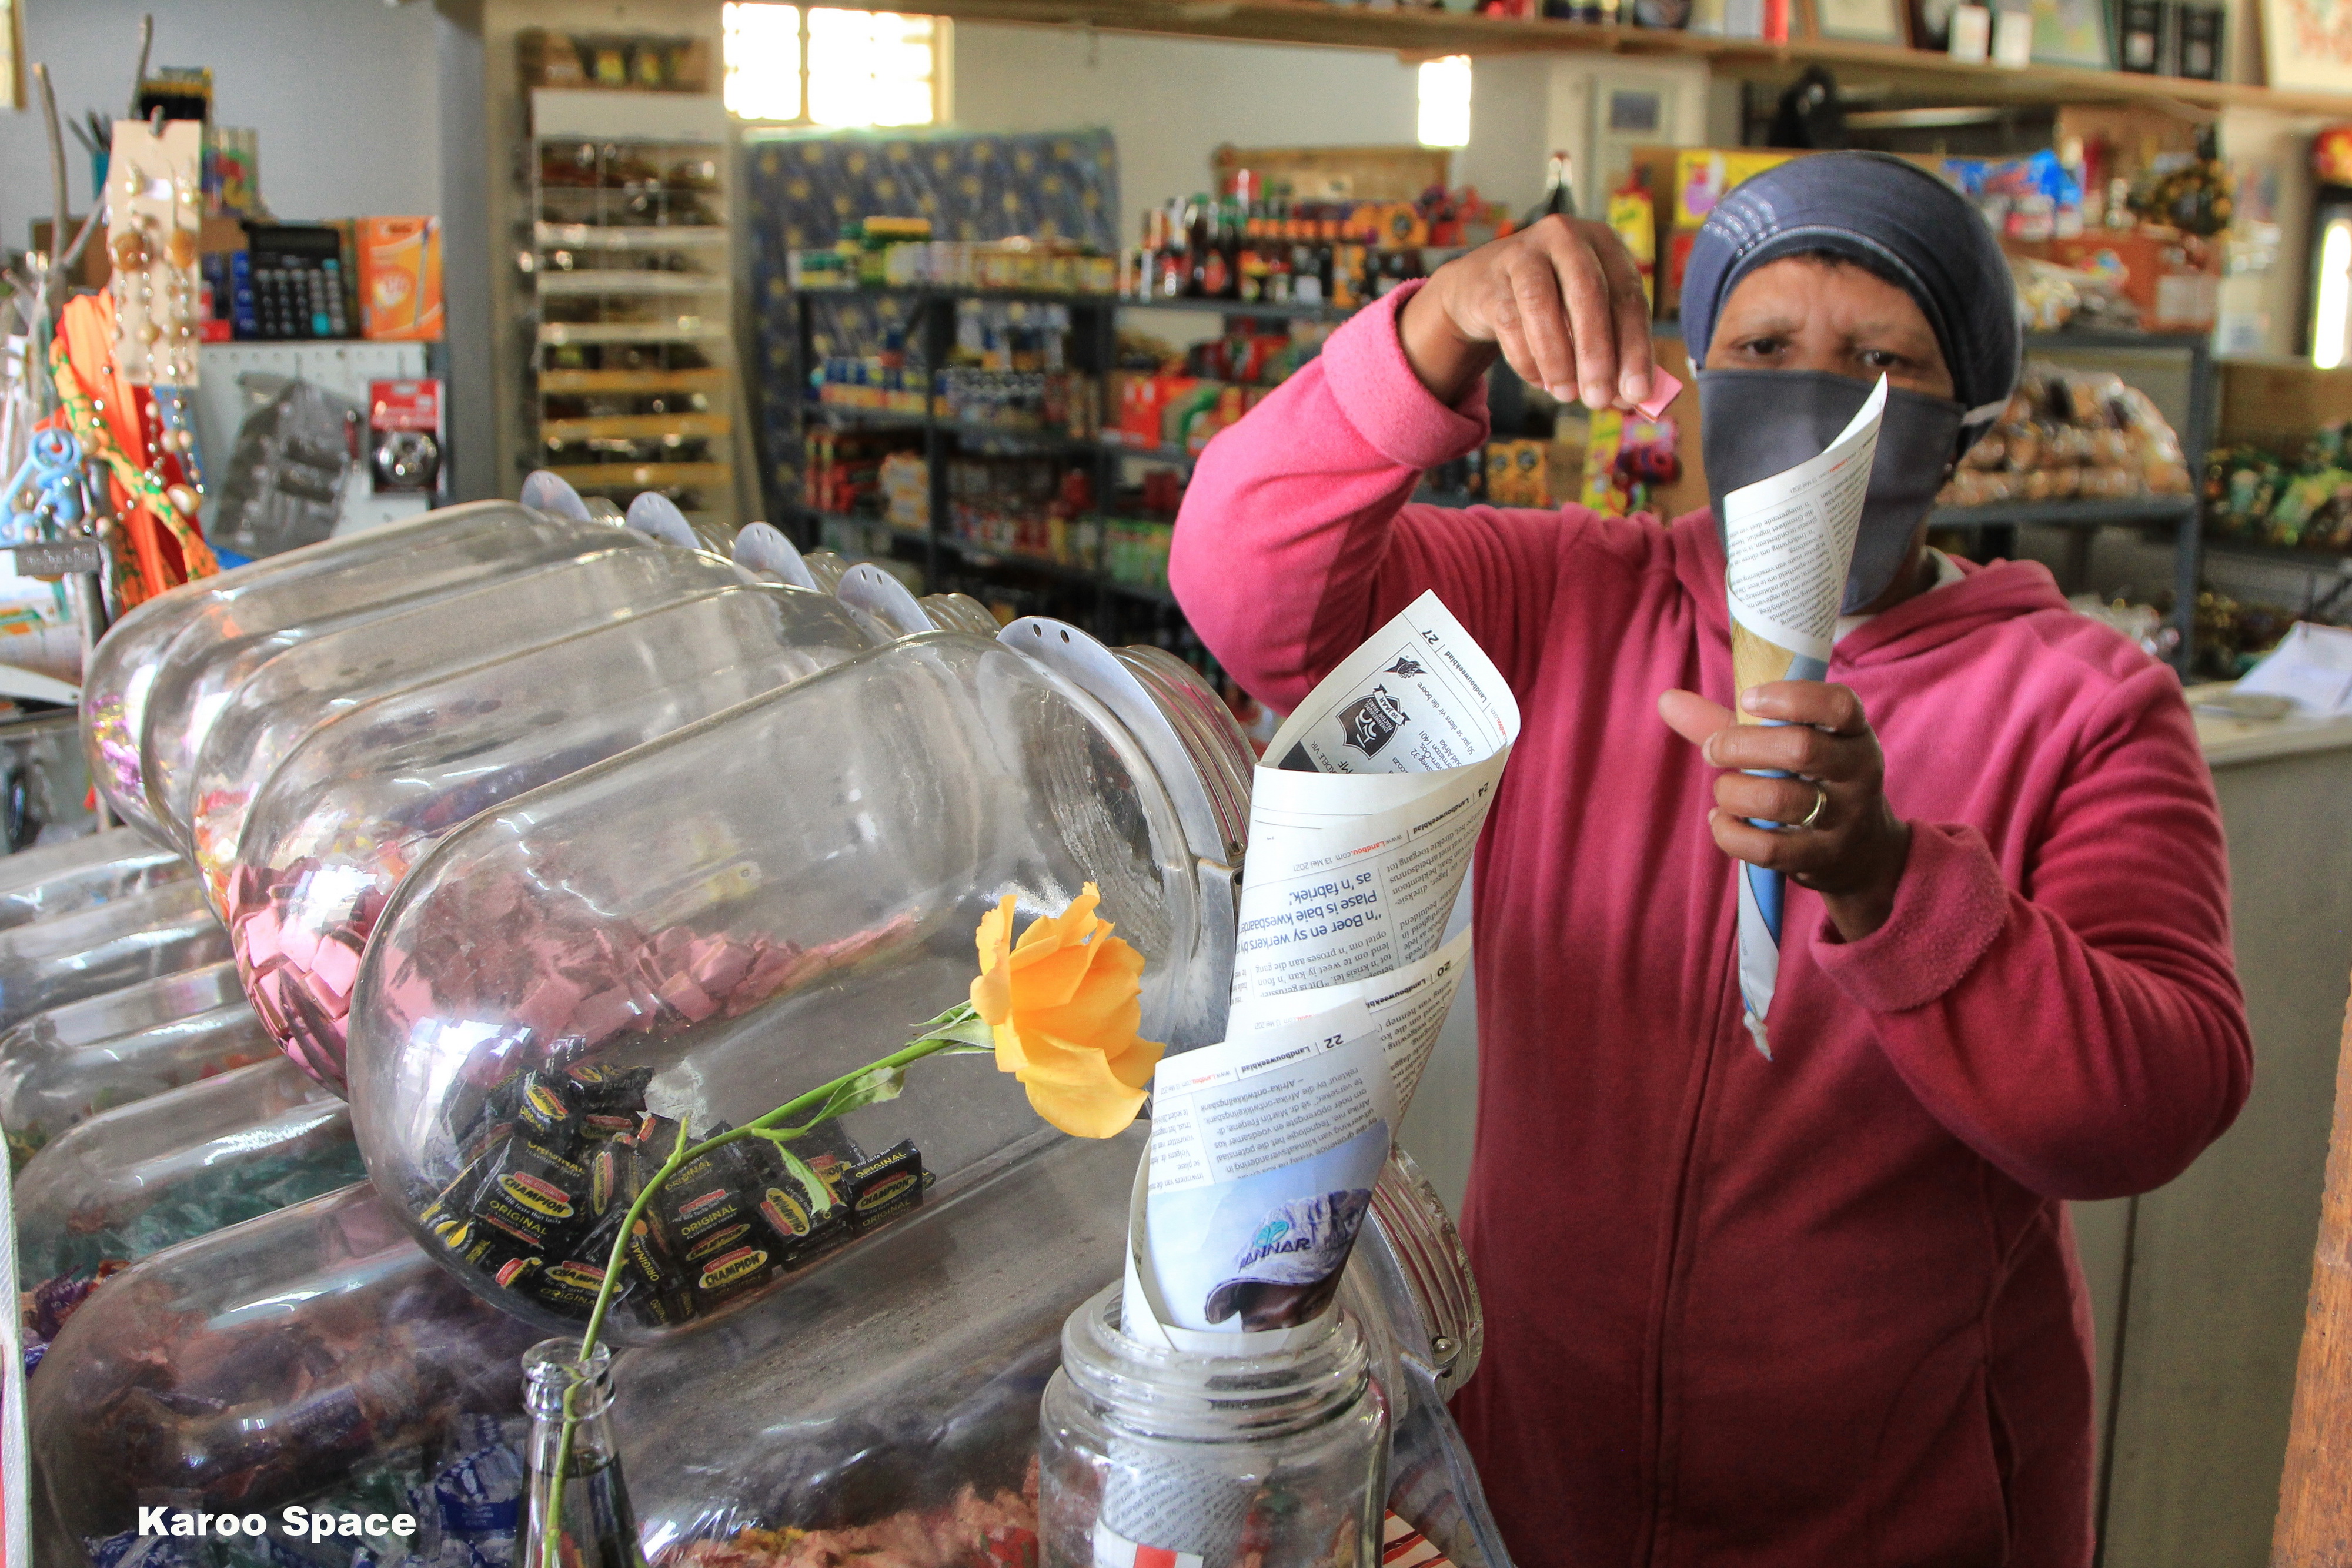 Hendrina Willemse serves sweets the old-fashioned Karoo way – in a twist of paper.